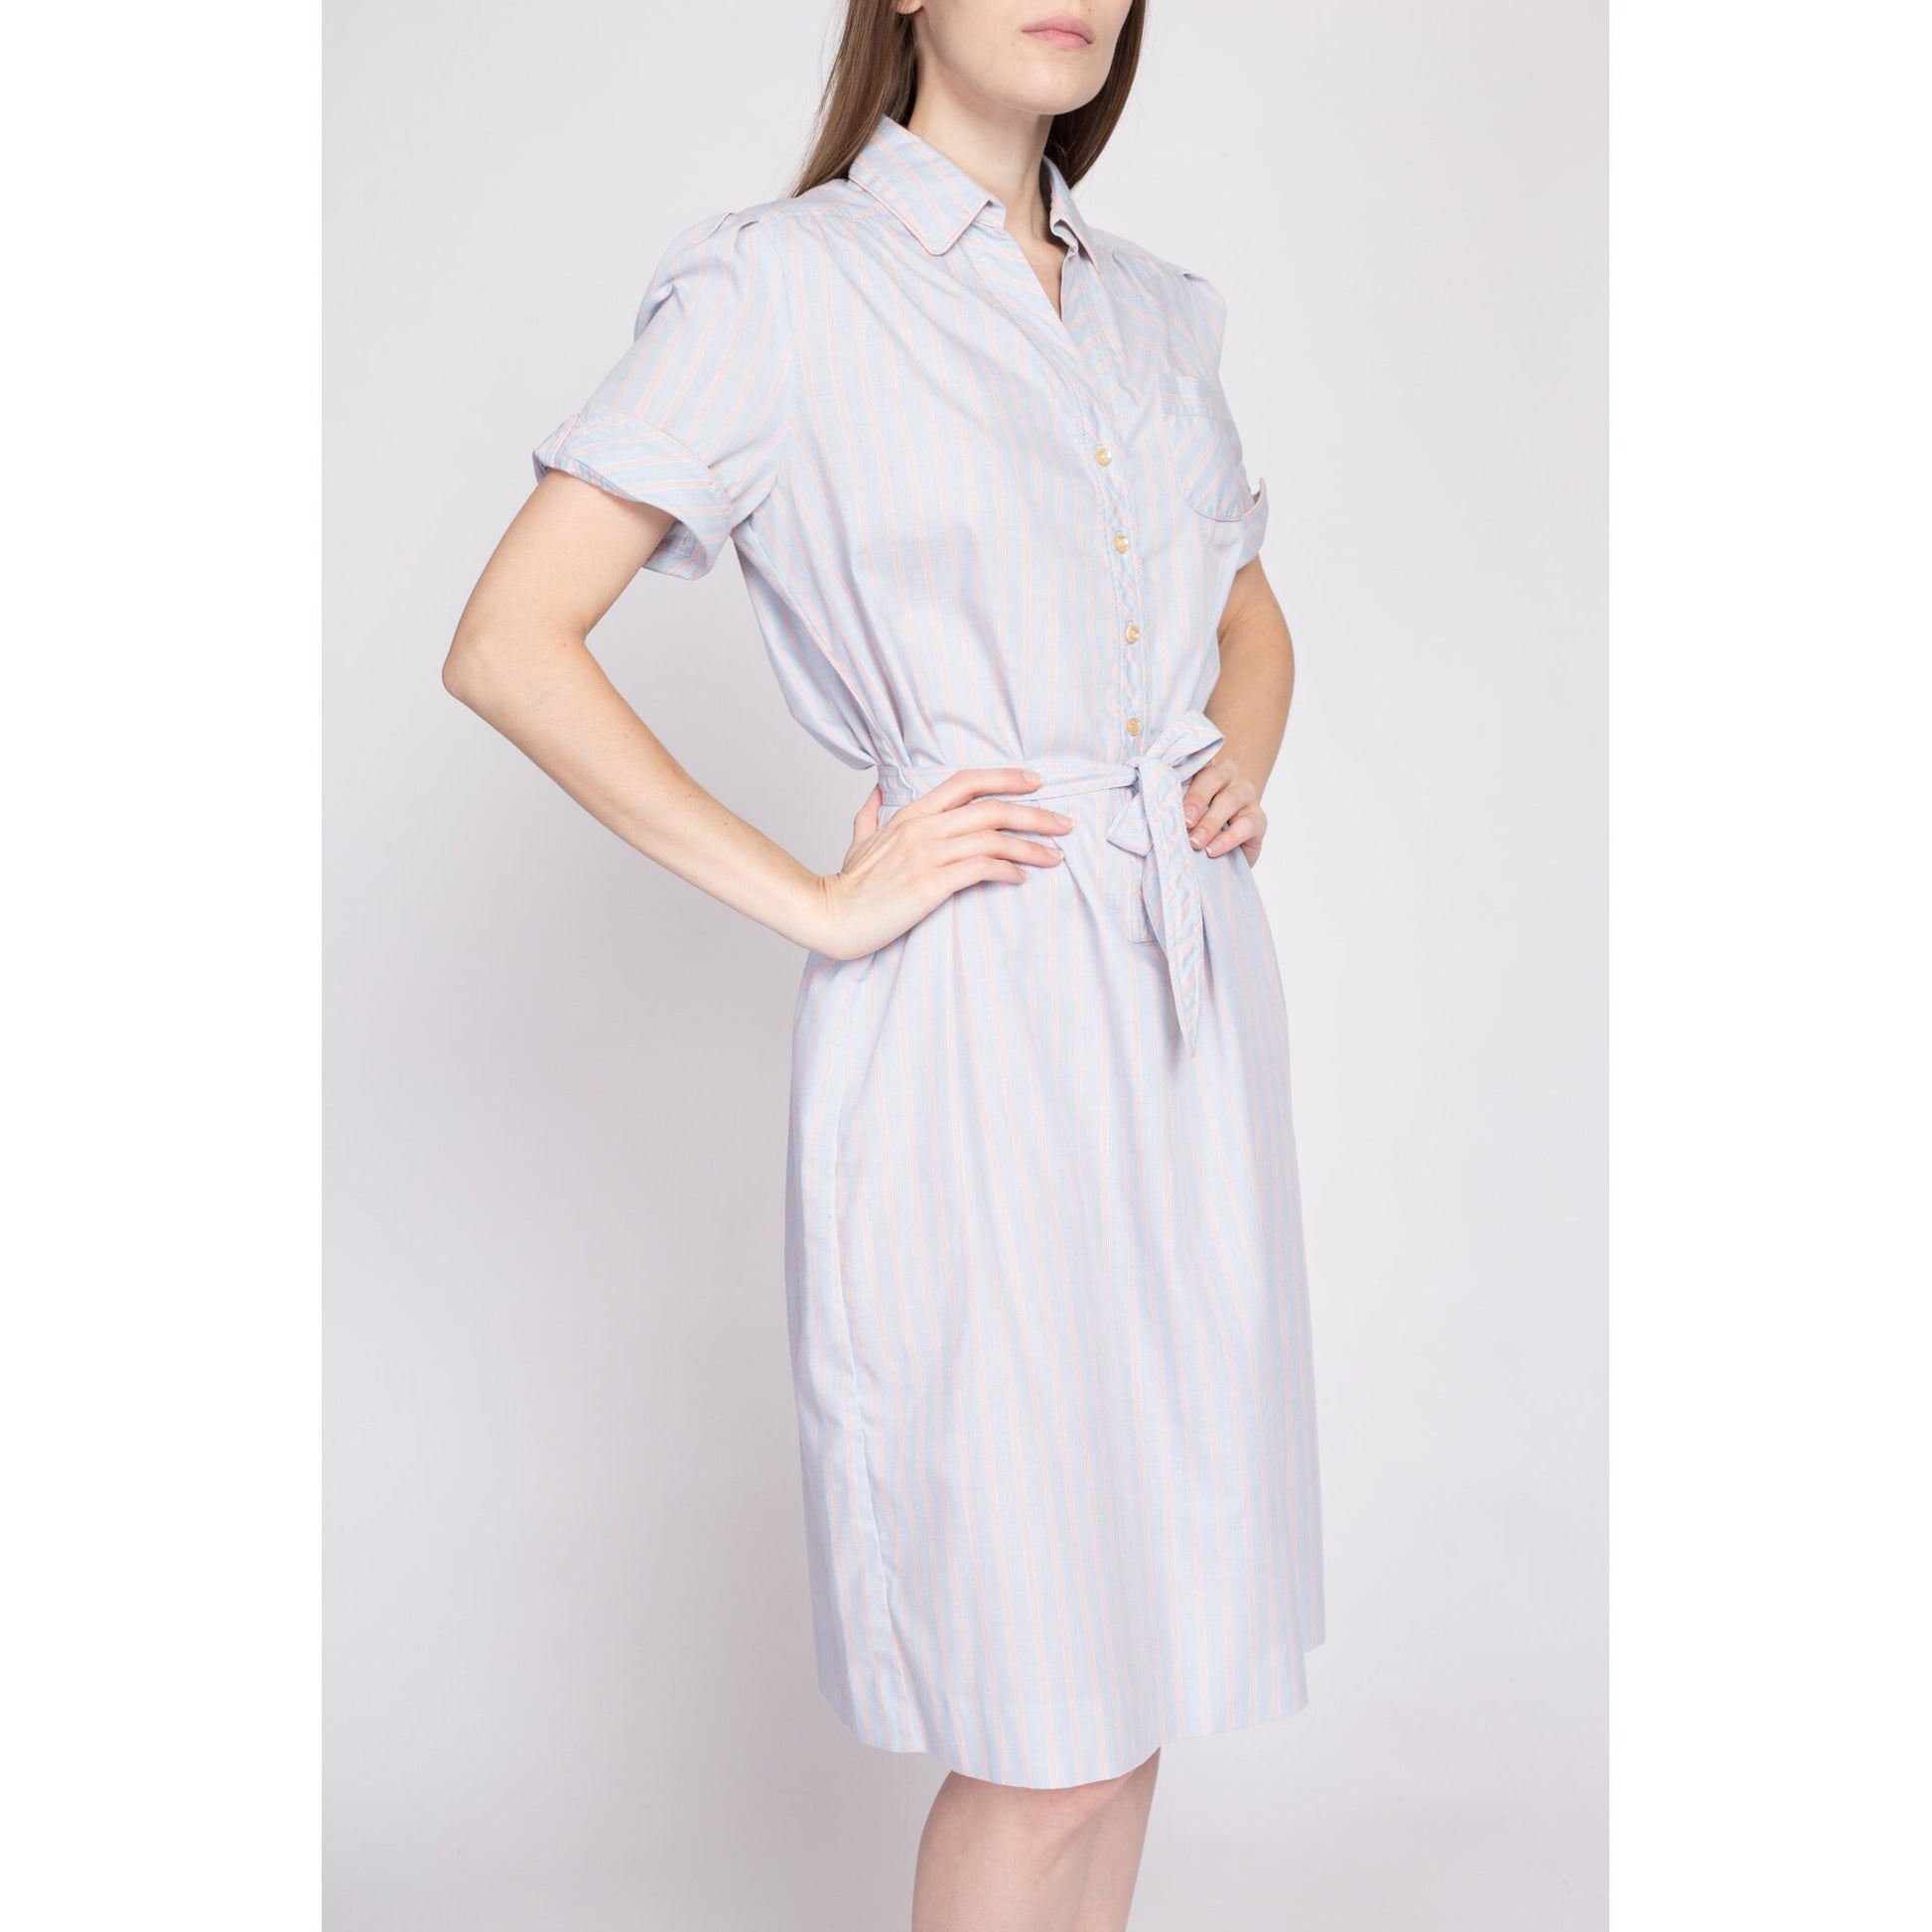 70s Blue Striped Belted Shirtdress - Medium to Large | Vintage Button Front Knee Length Short Sleeve Midi Day Dress